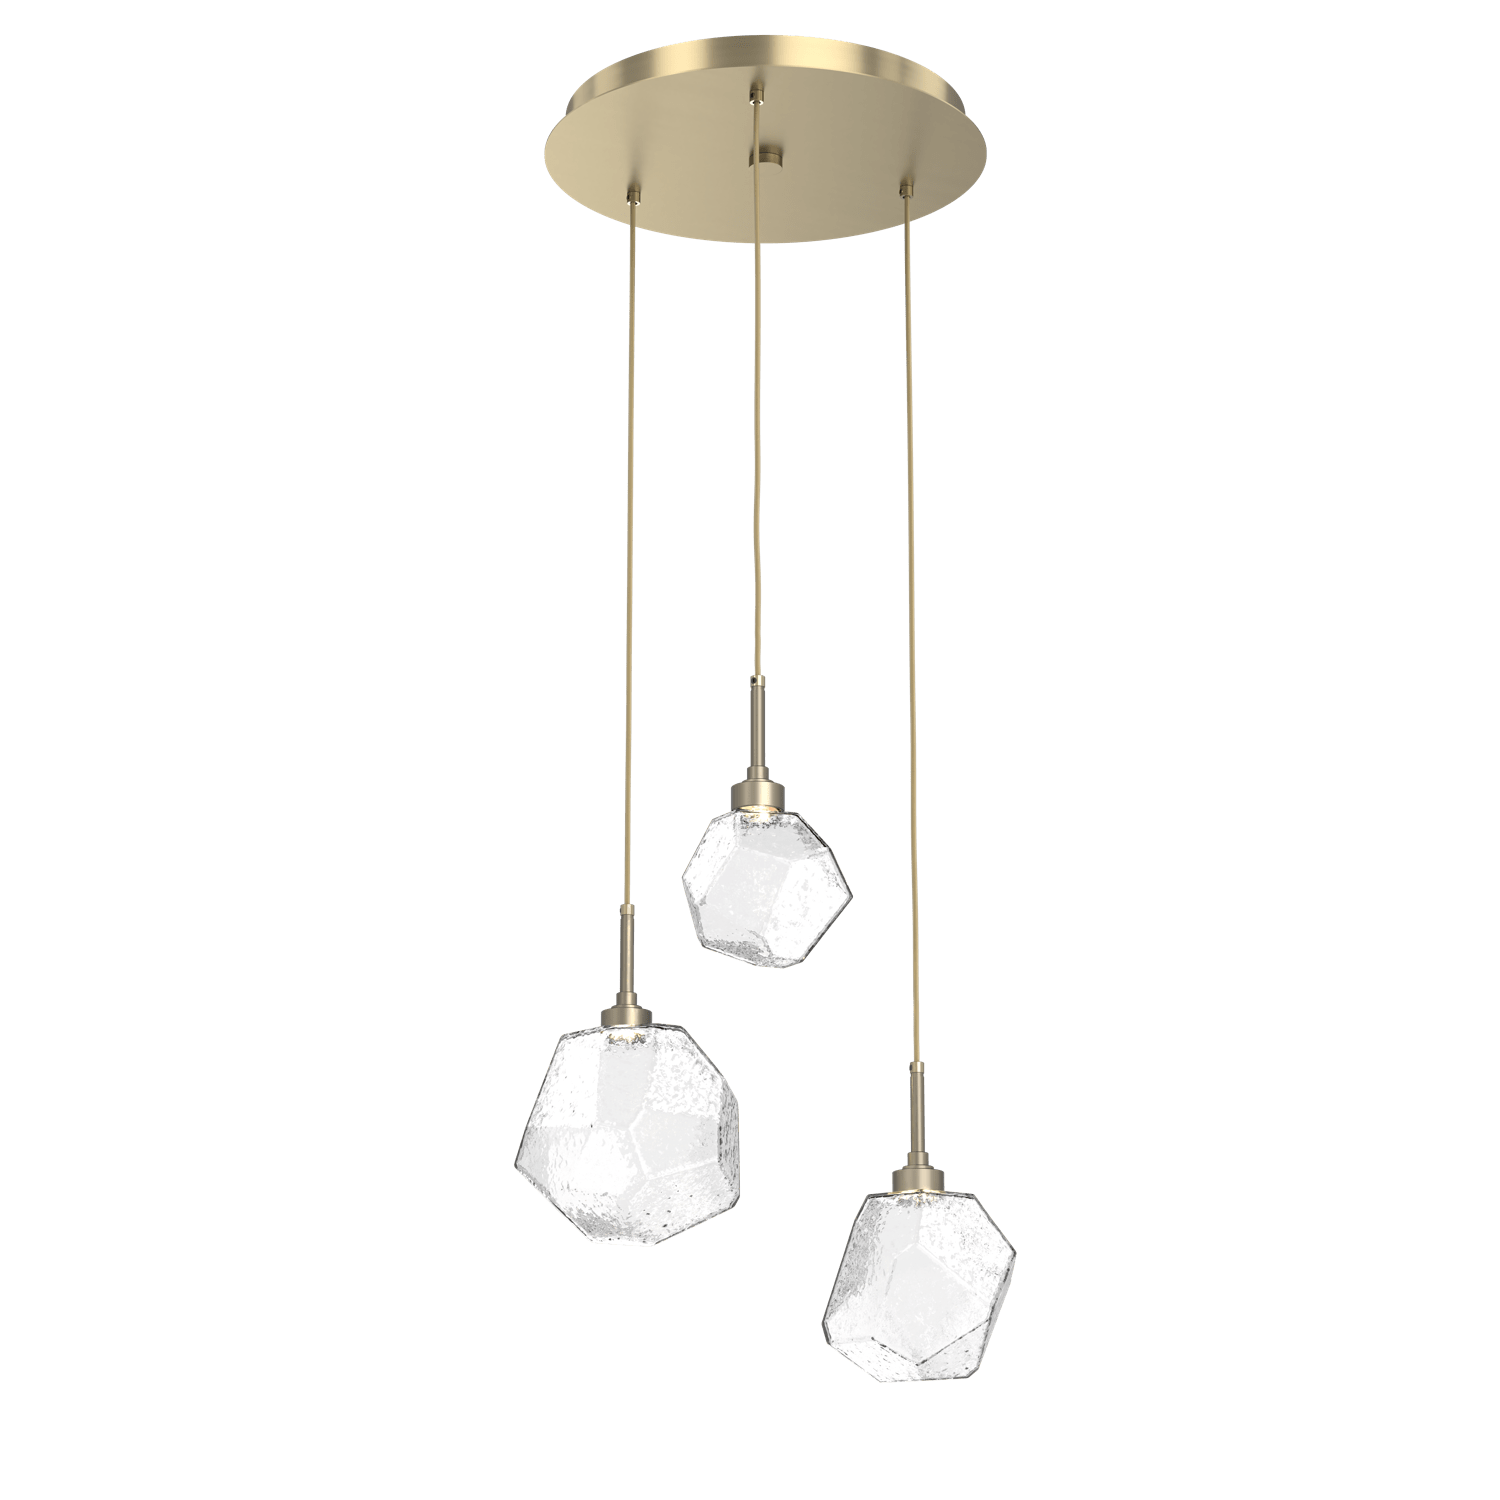 CHB0039-03-HB-C-Hammerton-Studio-Gem-3-light-round-pendant-chandelier-with-heritage-brass-finish-and-clear-blown-glass-shades-and-LED-lamping